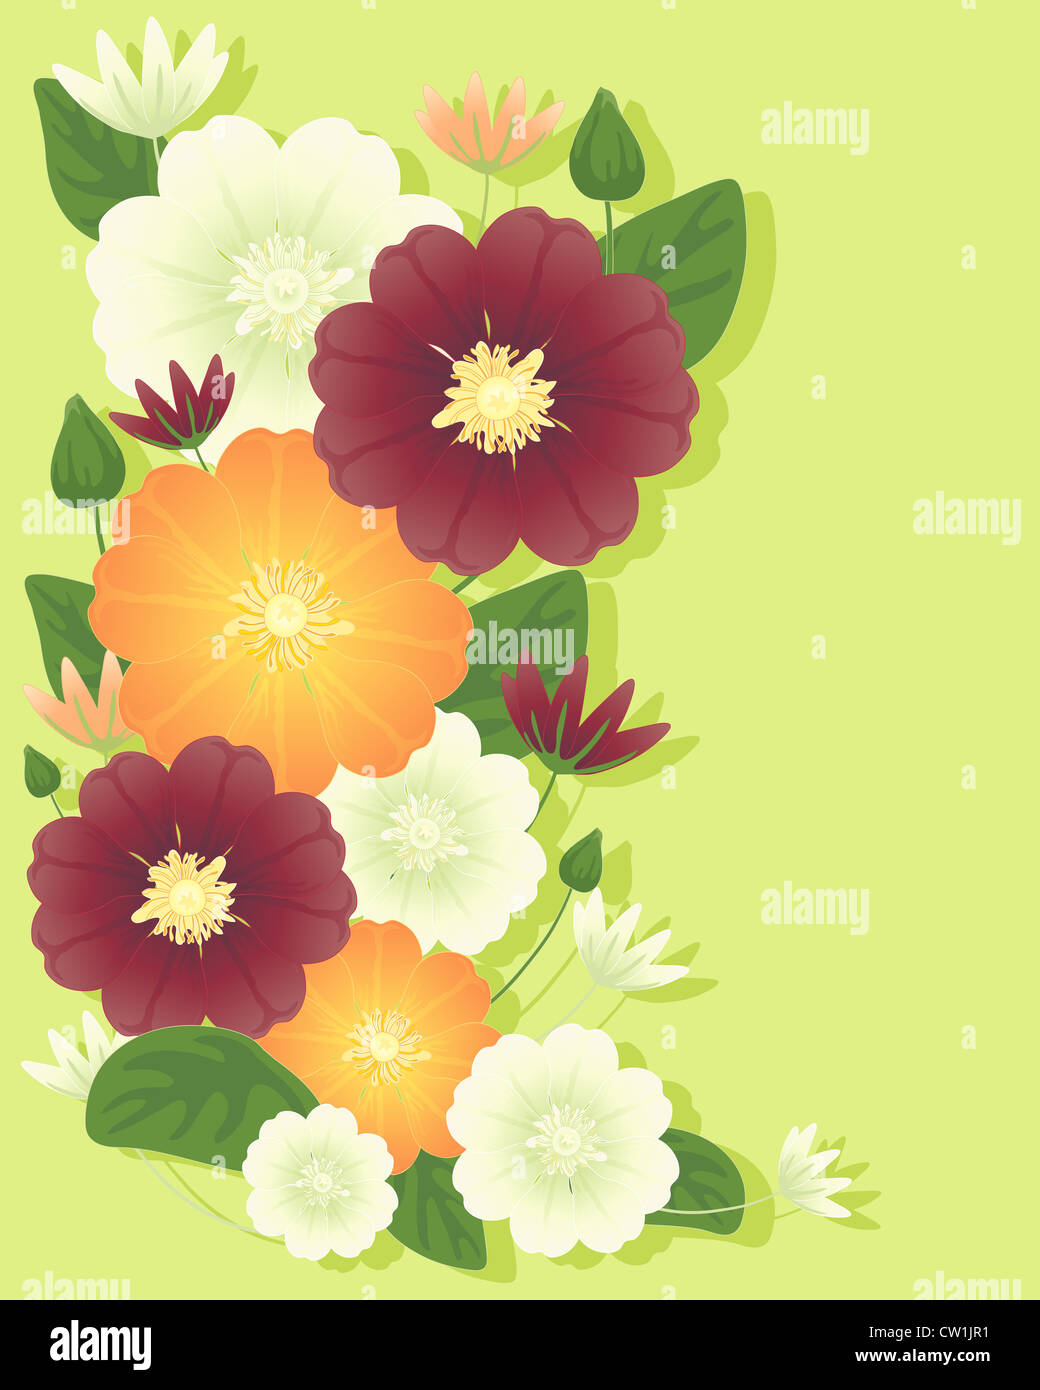 an illustration of clematis flowers in orange cream and maroon with foliage and buds on a pale green background with shadow Stock Photo